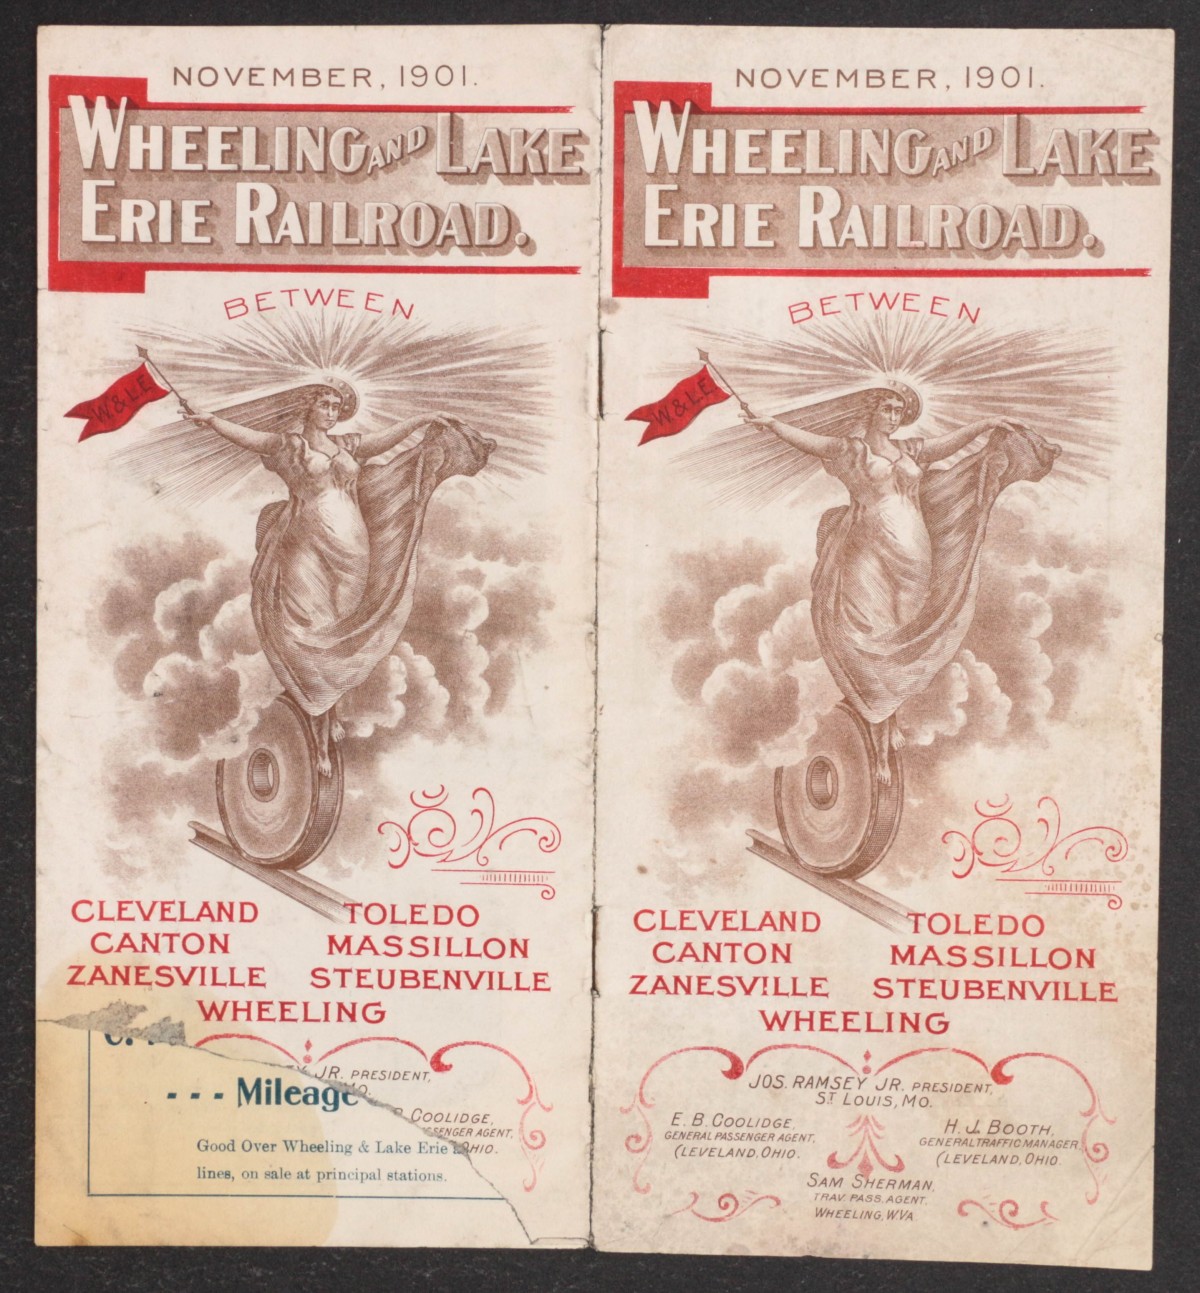 WHEELING AND LAKE ERIE RAILROAD TIMETABLE FOR 1901